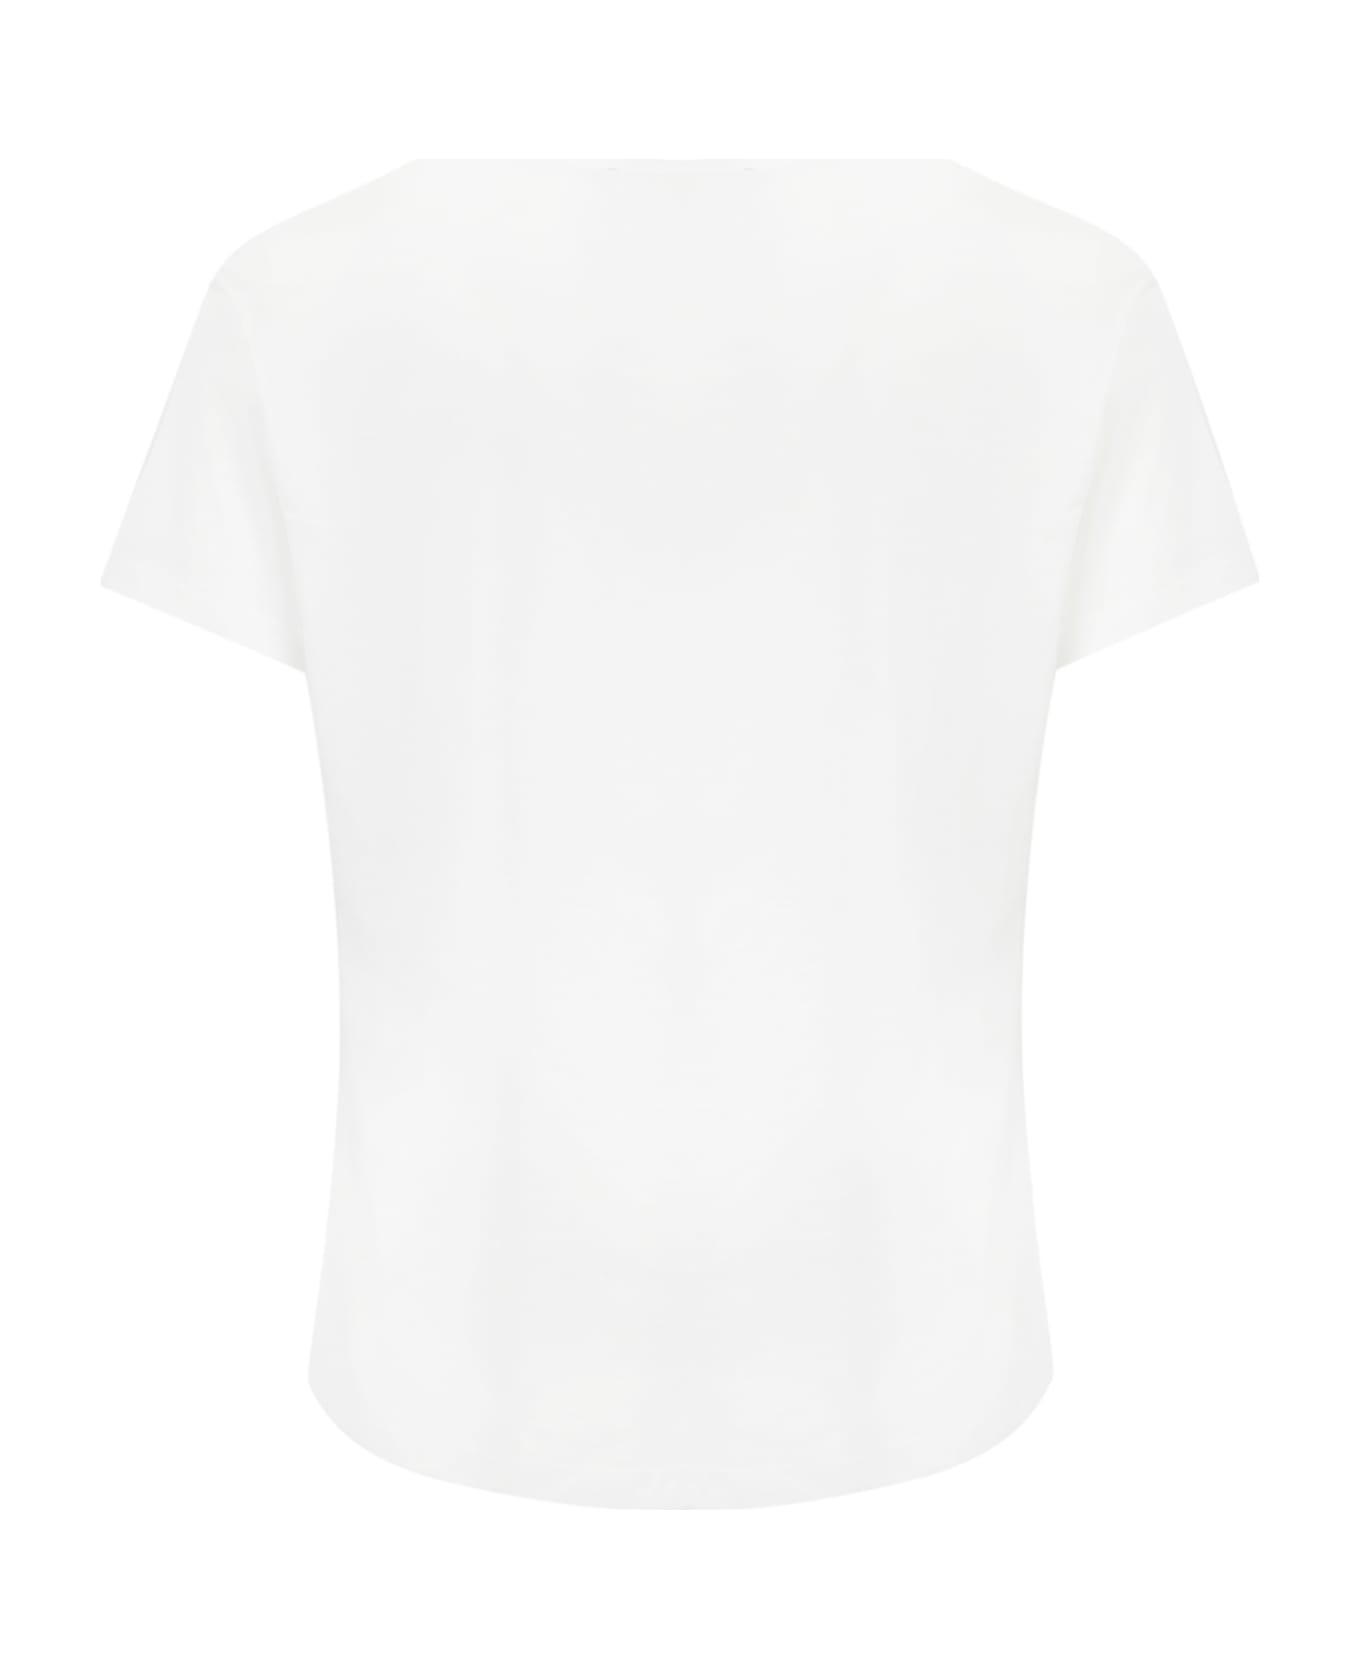 Roy Rogers Cotton T-shirt With Logo Patch - OFF WHITE シャツ